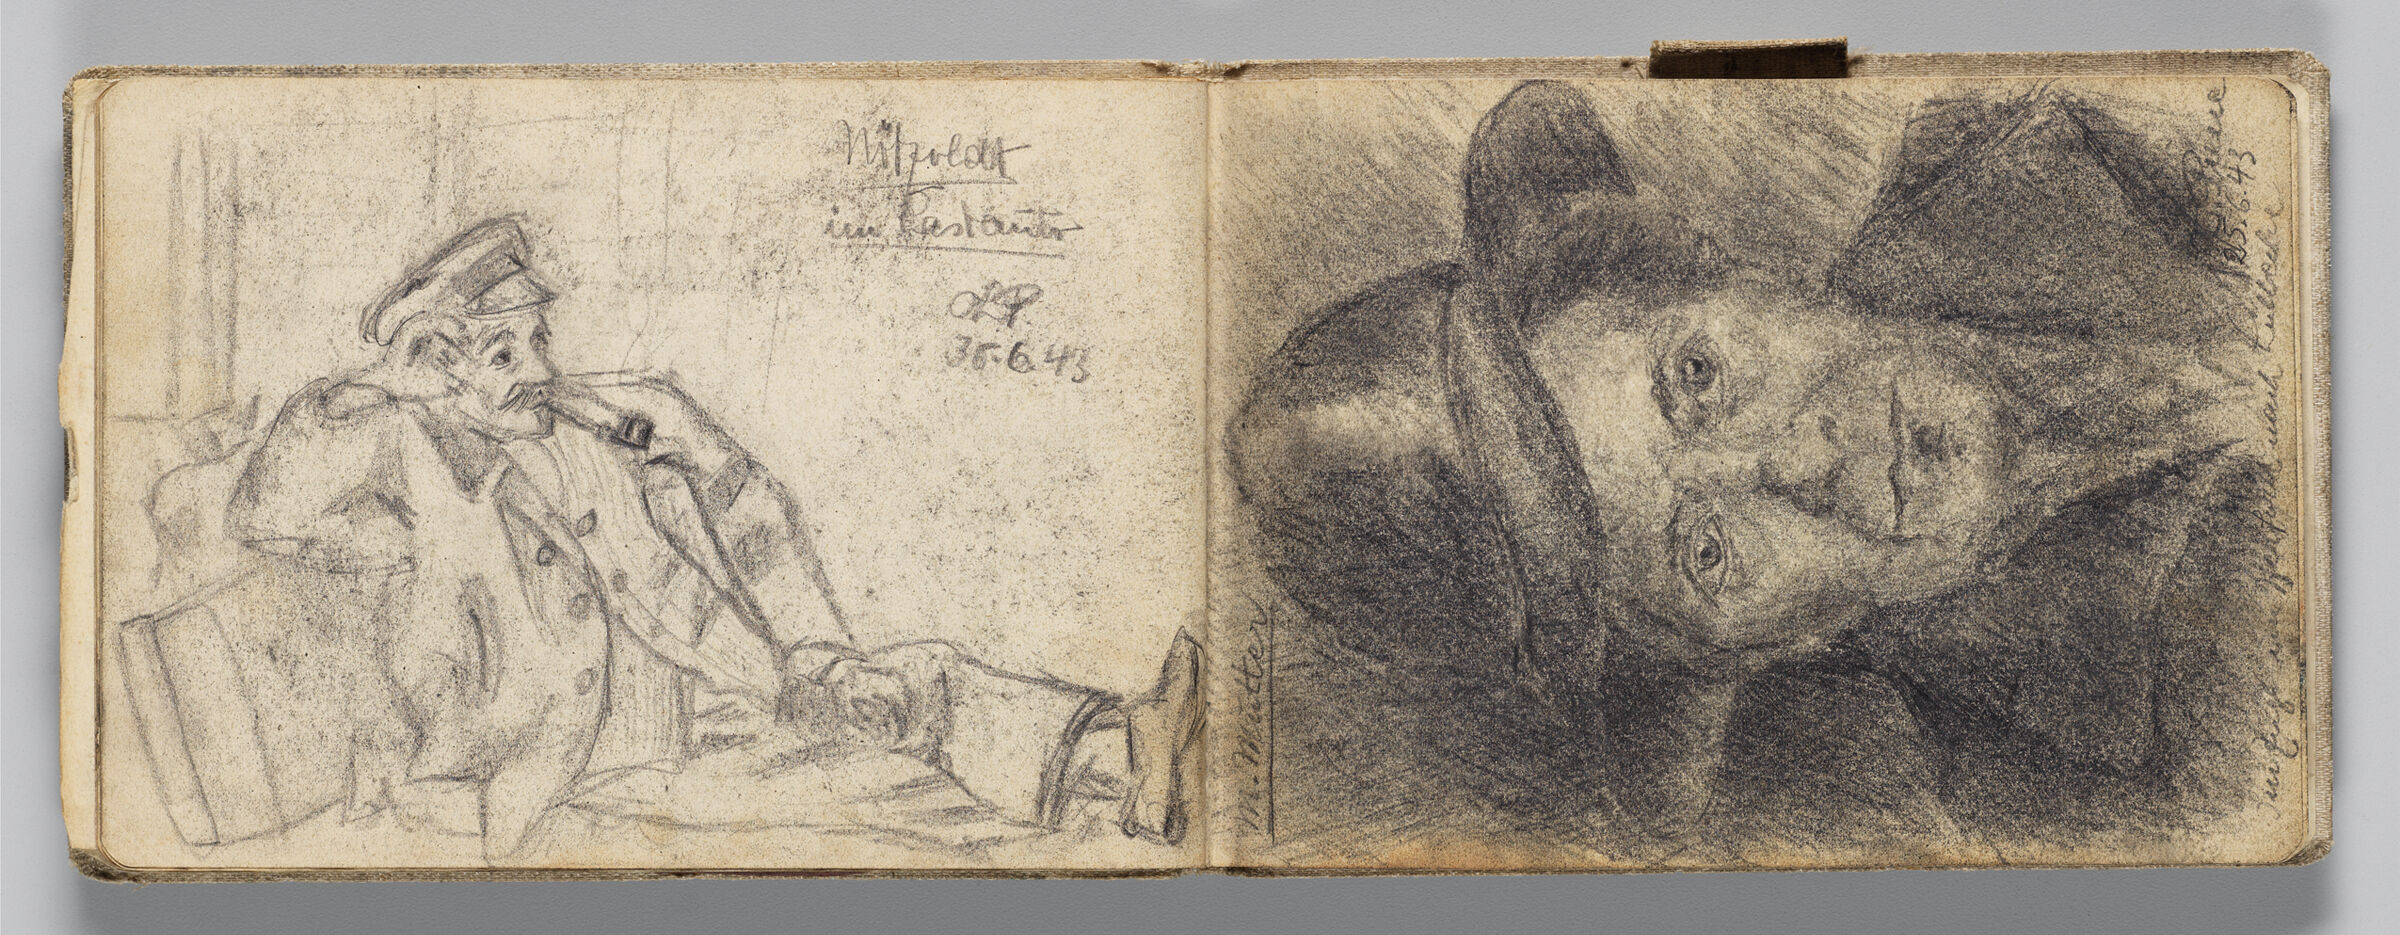 Untitled (Portrait Of Artist's Mother, Left Page); Untitled (Sailor Smoking Pipe, Right Page)